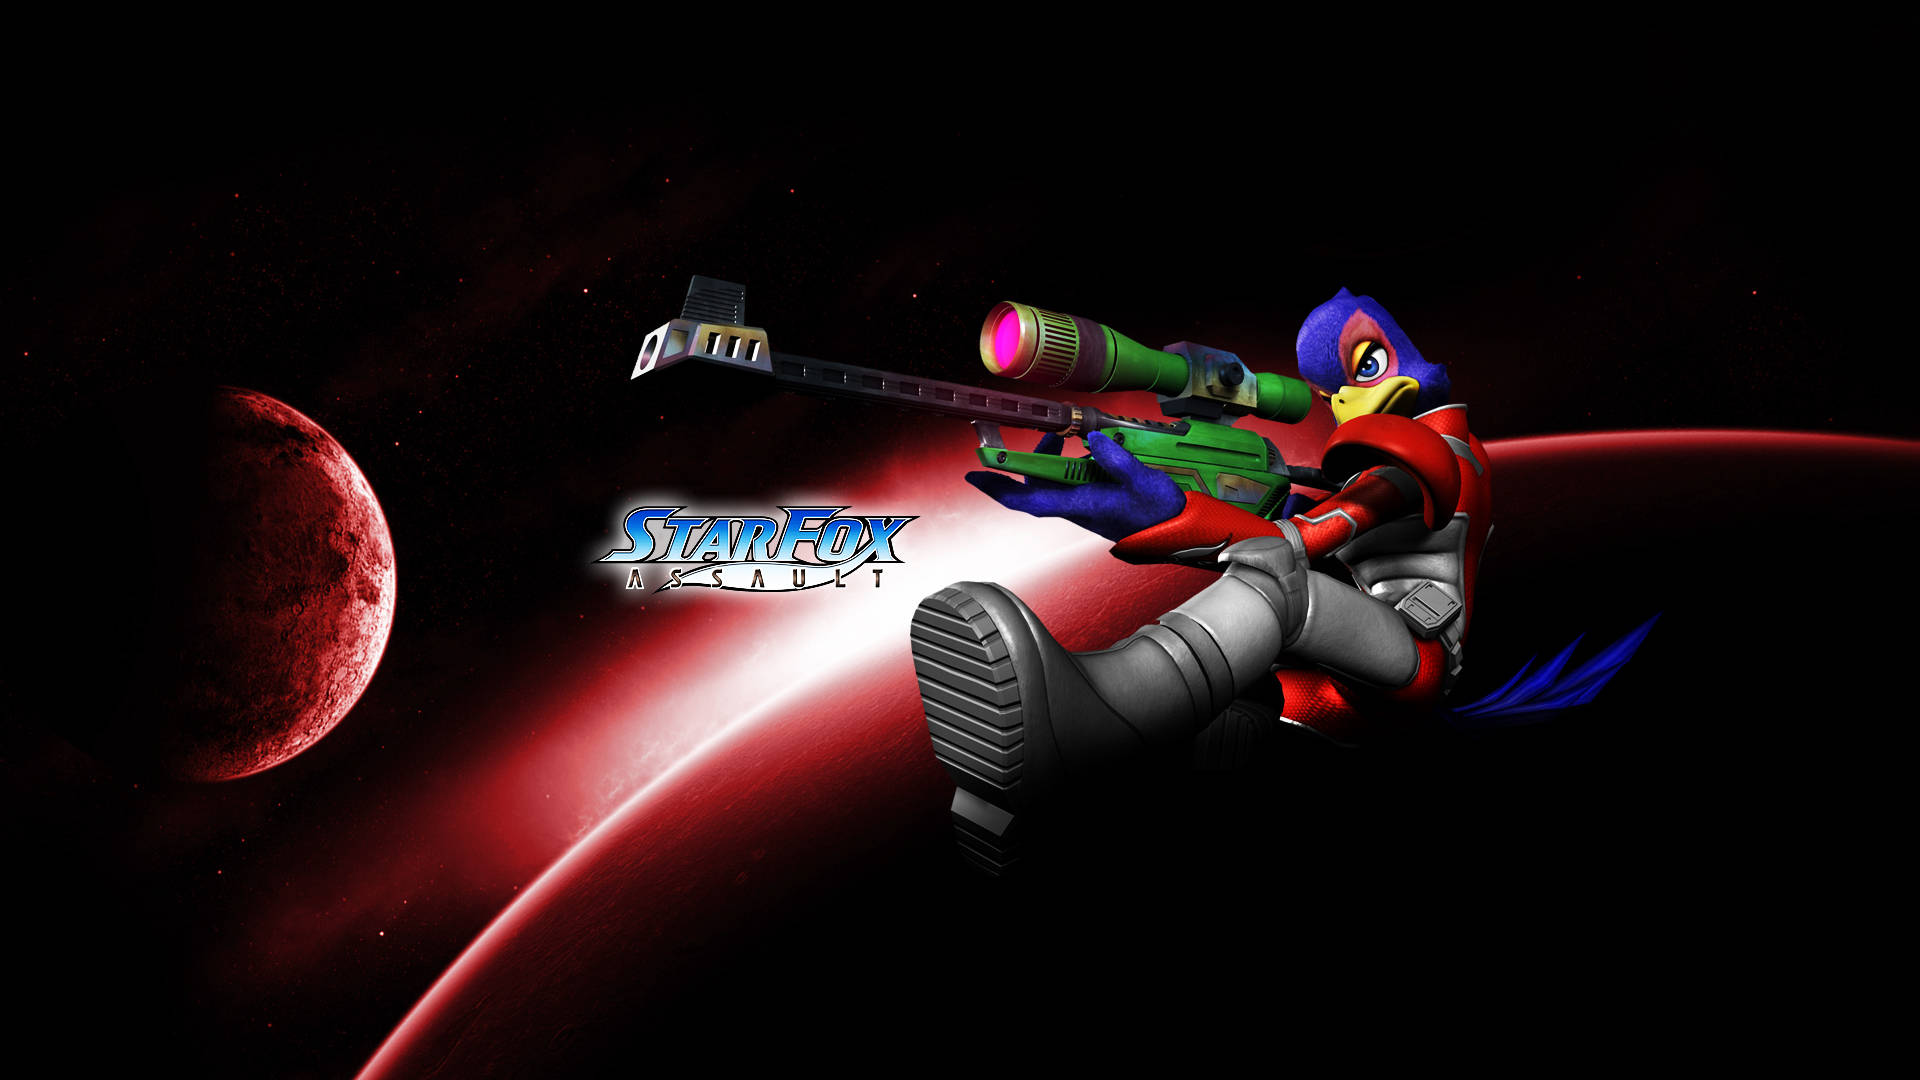 Star Fox Assault Falco Lombardi In Space Background